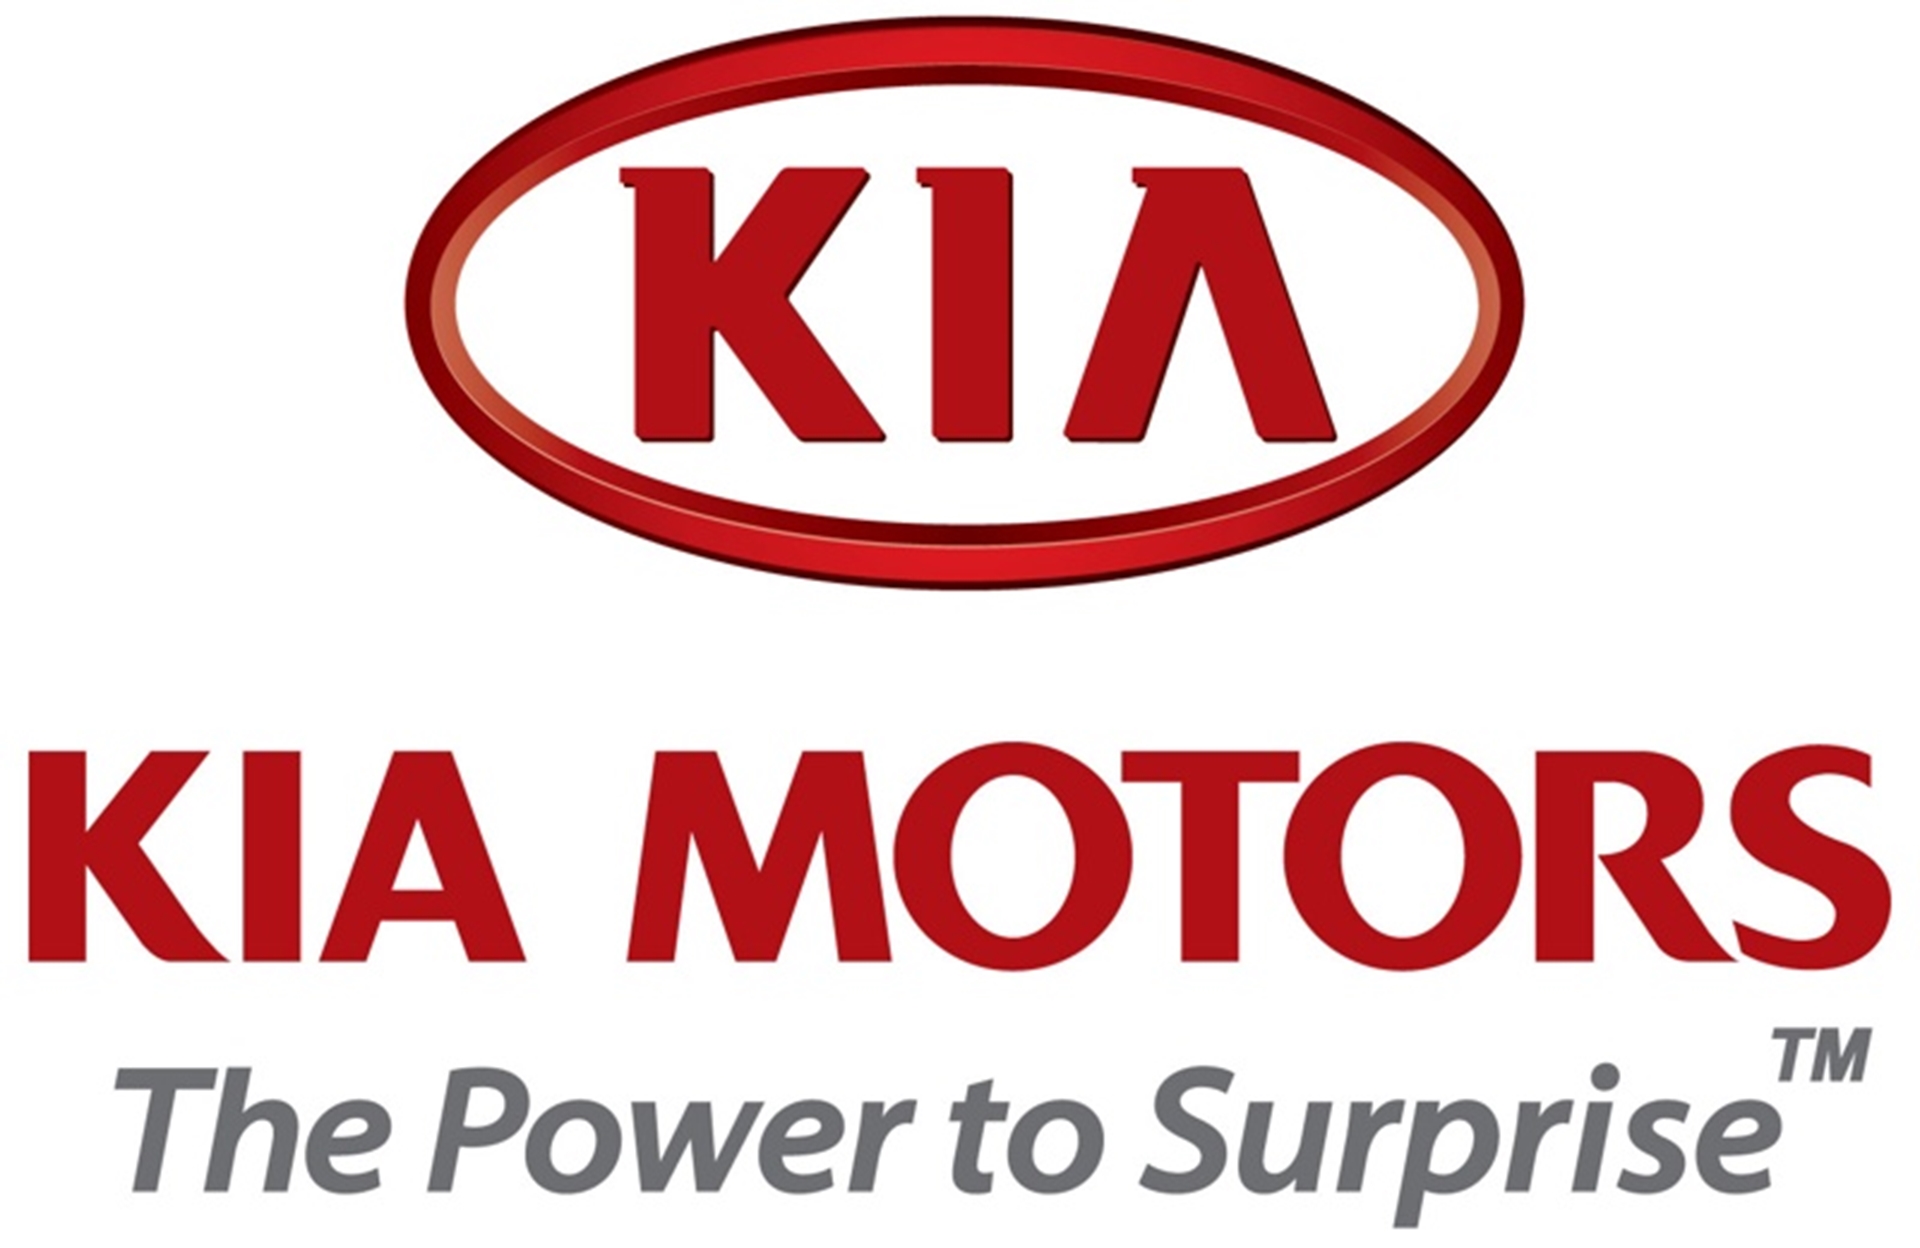 APRIL SHOWERS KIA WITH CONTINUING GROWTH